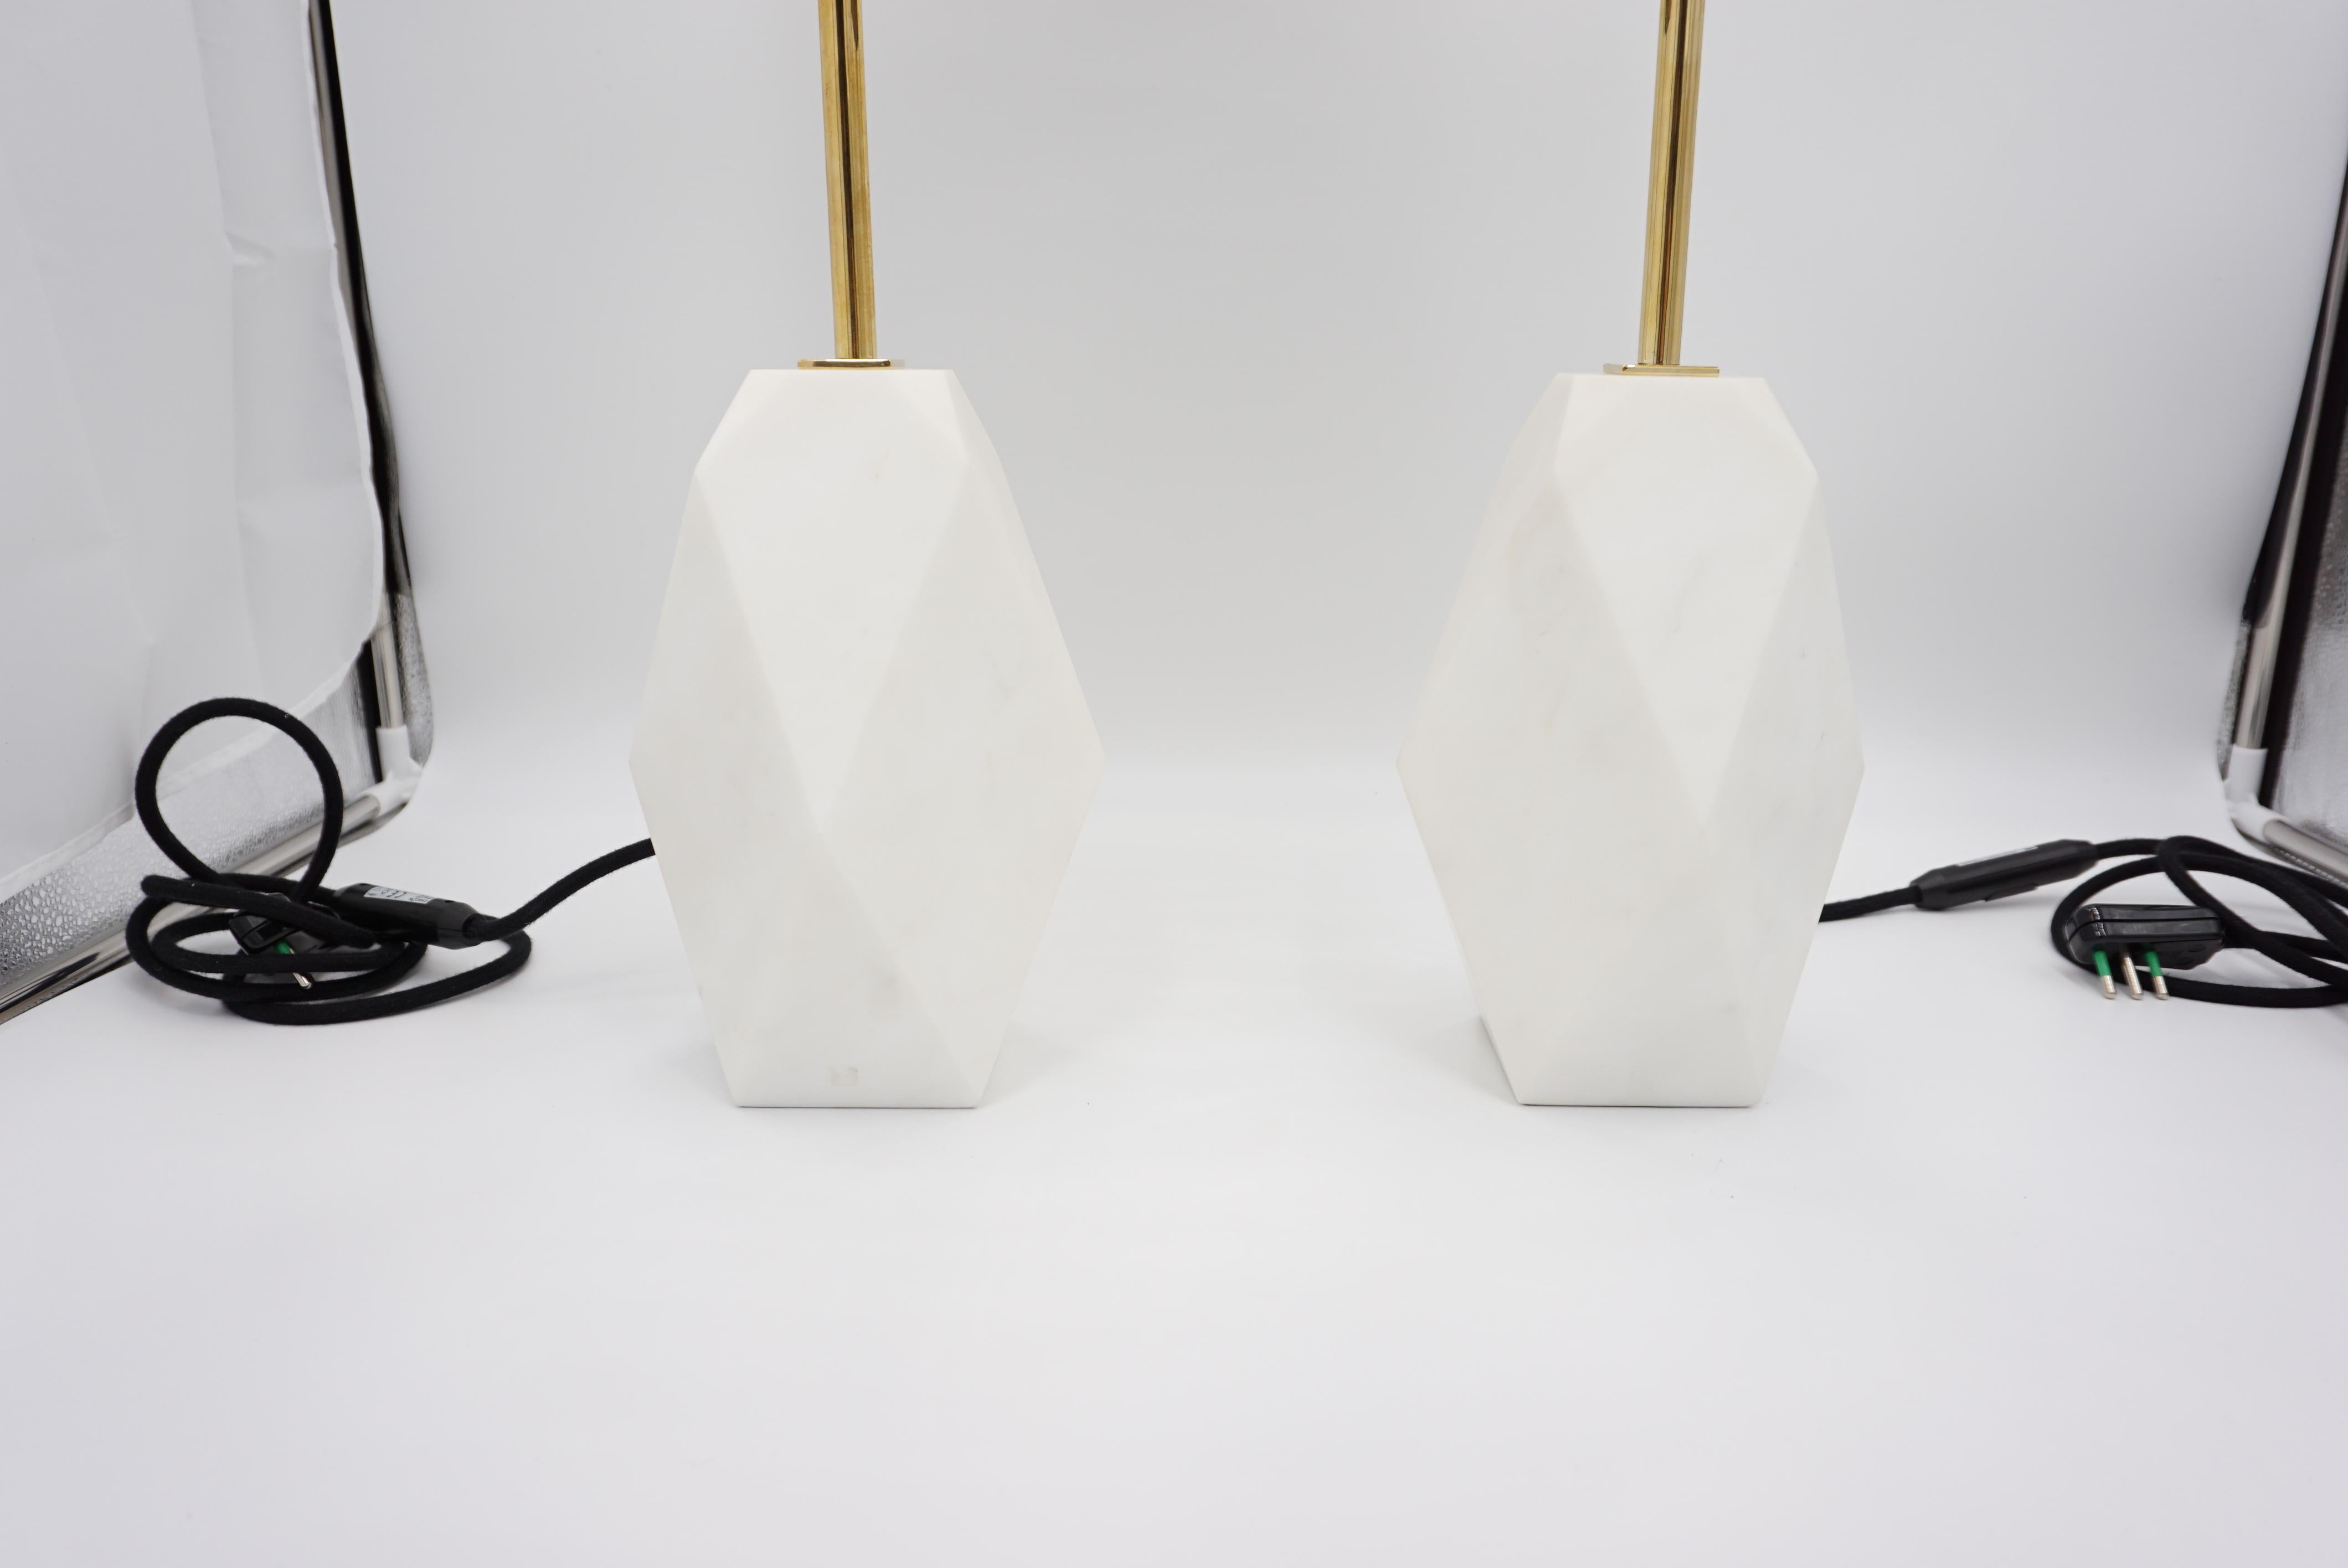 White Carrara Marble Pair of Sculptural Table Lamps "Prisma" by Lorenzo  Ciompi For Sale at 1stDibs